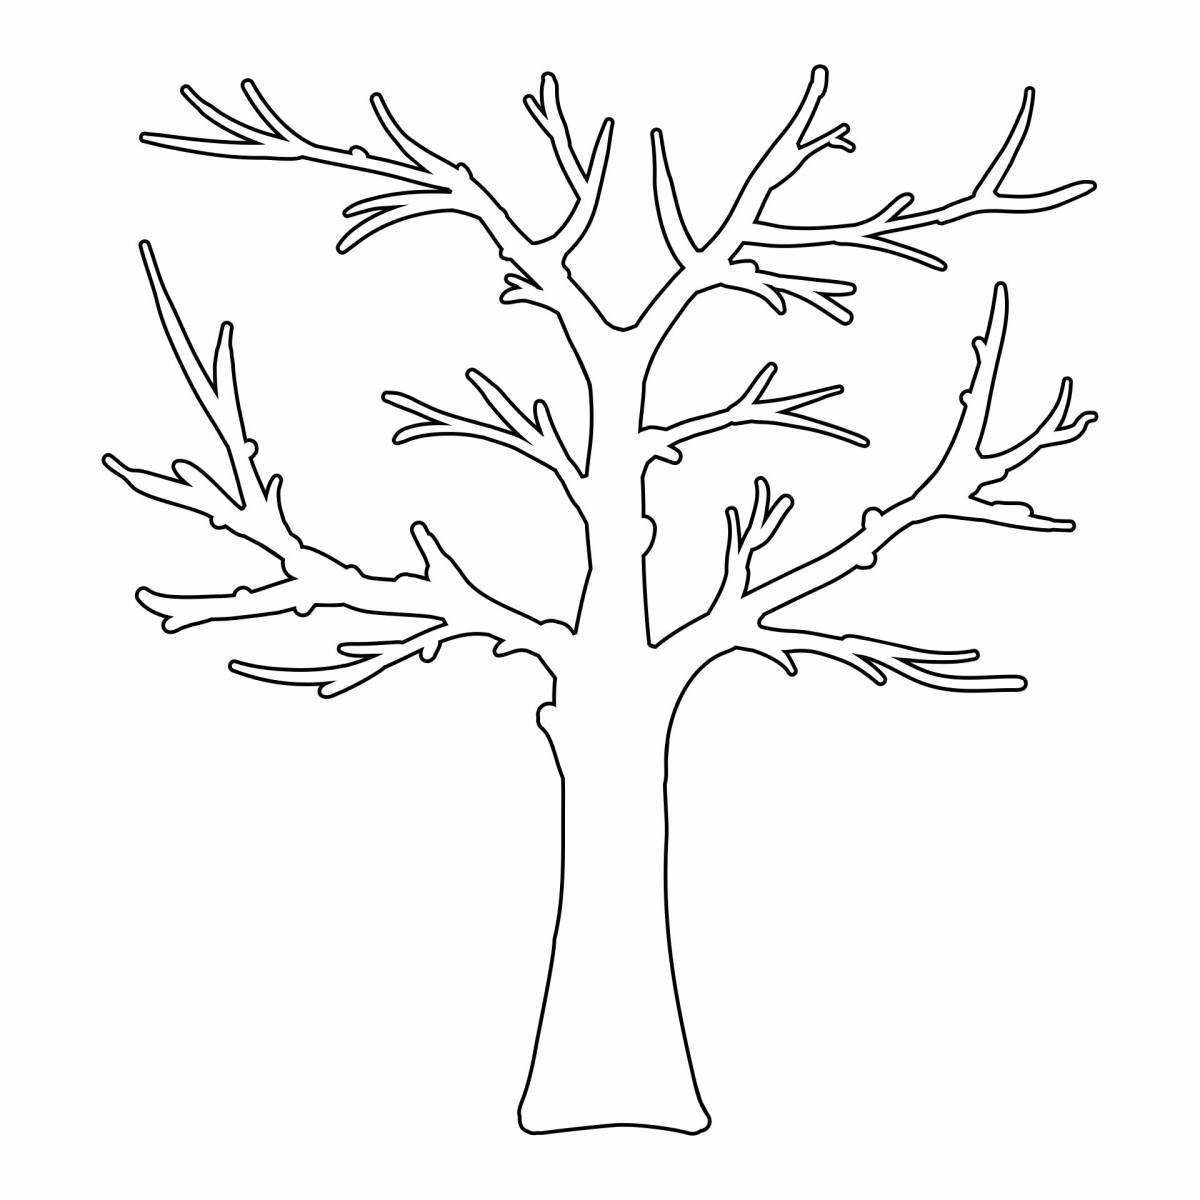 Shiny tree coloring book for 2-3 year olds